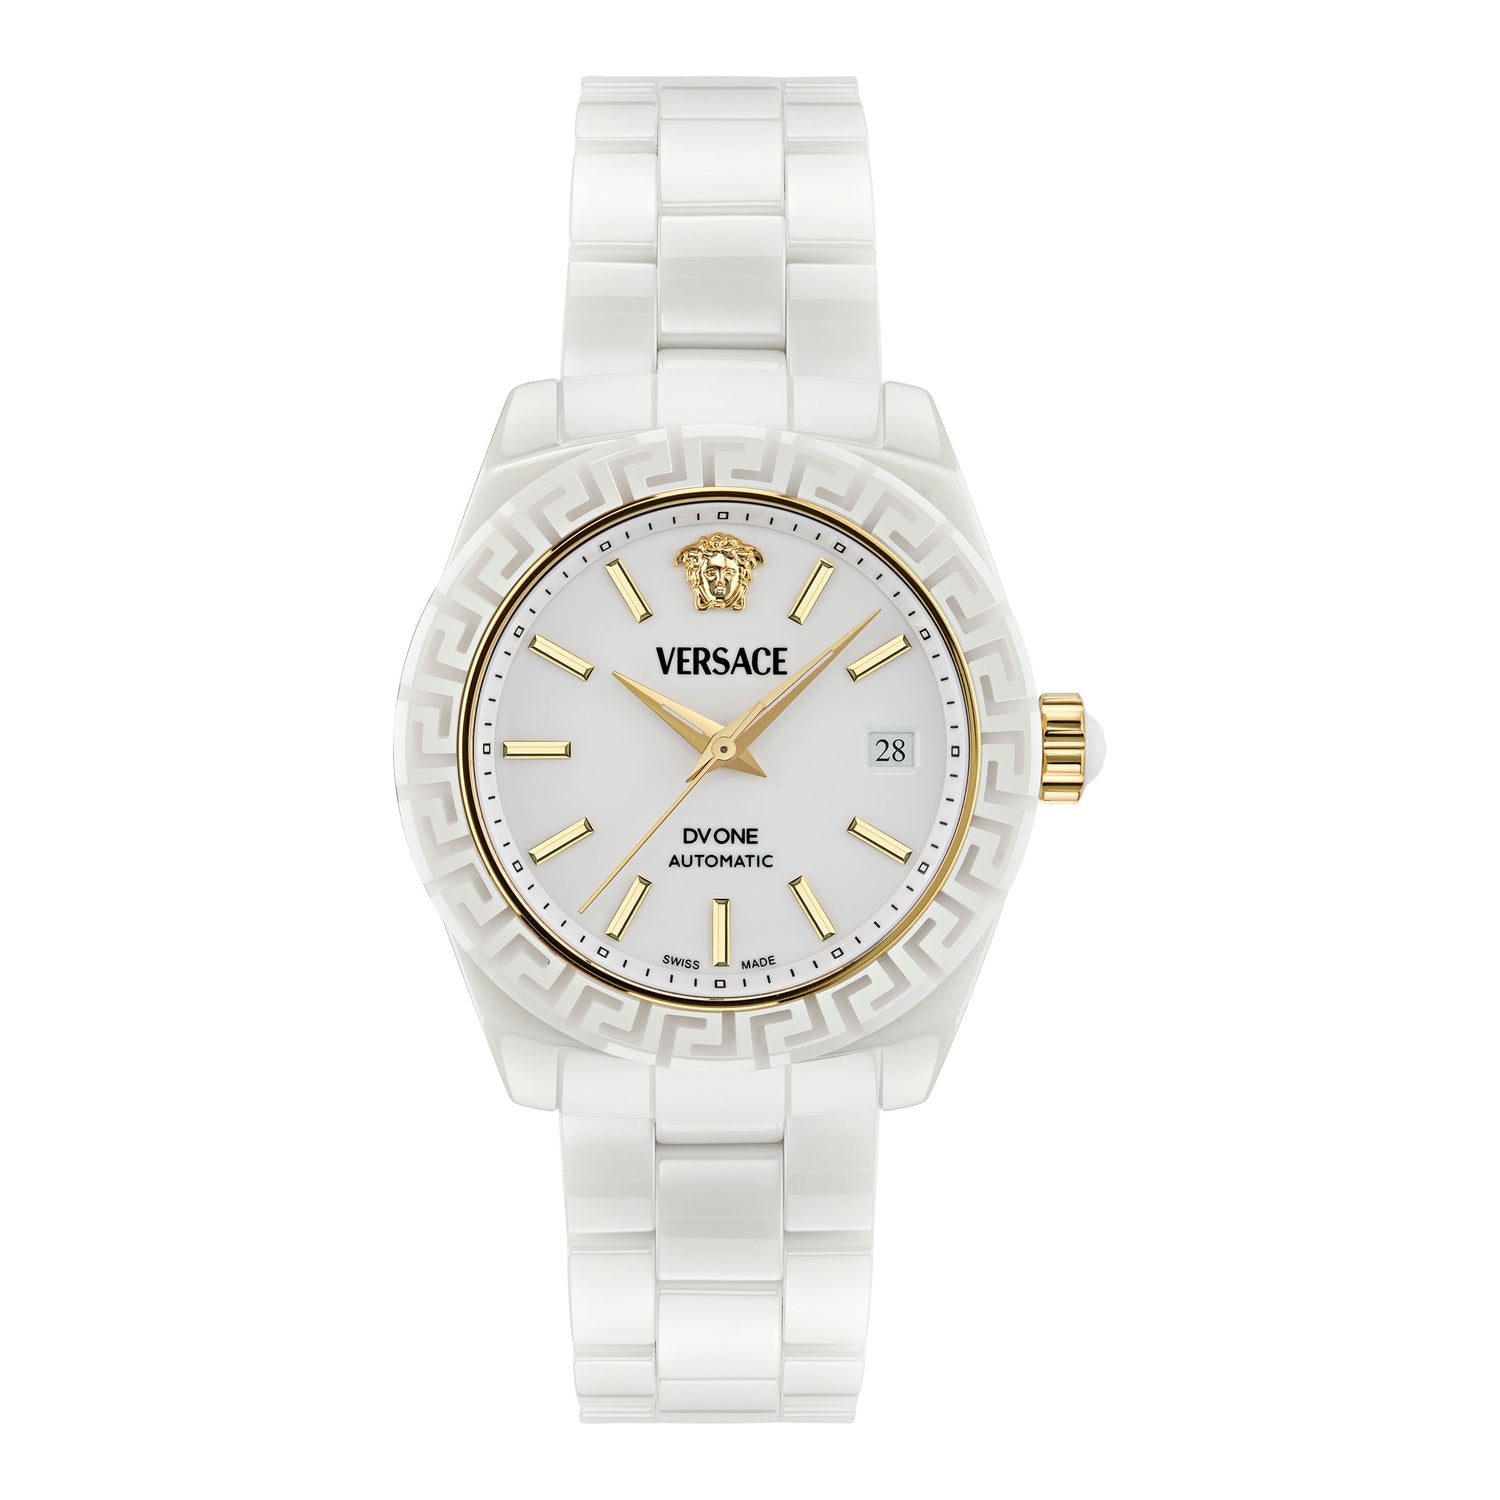 Versace DV One Automatic Watch